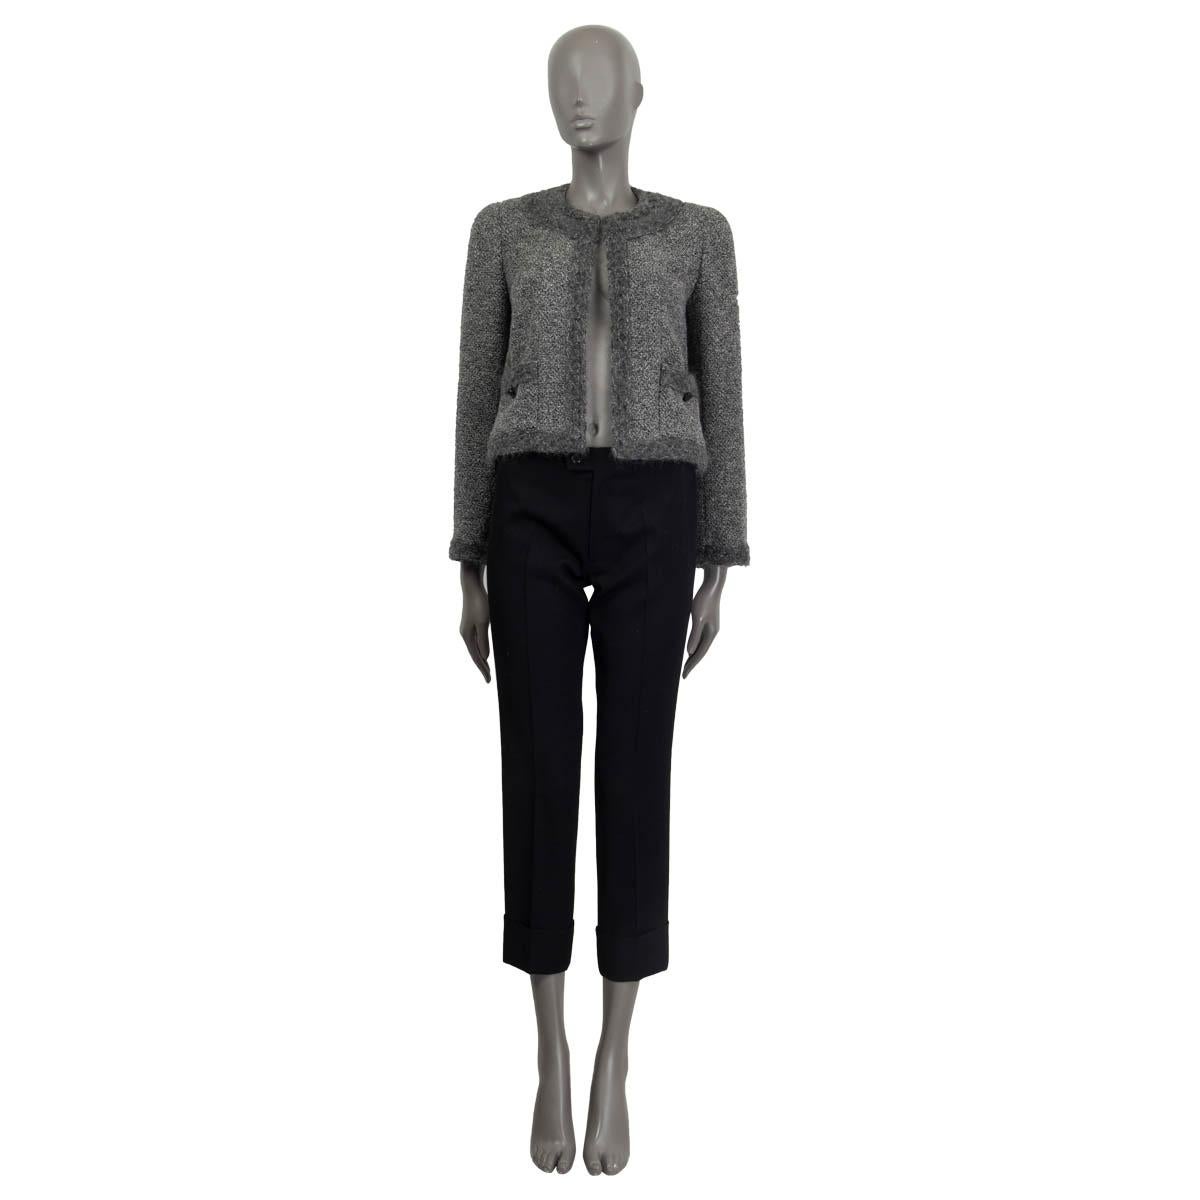 100% authentic Chanel Fall/Winter 1998 blazer in gray and charcoal wool (50%) and alpaka (50%). Features padded shoulders, knit details at the neck, cuffs and the 'CC' buttoned front pockets. Opens with one hook on the front. Sleeves lined in gray